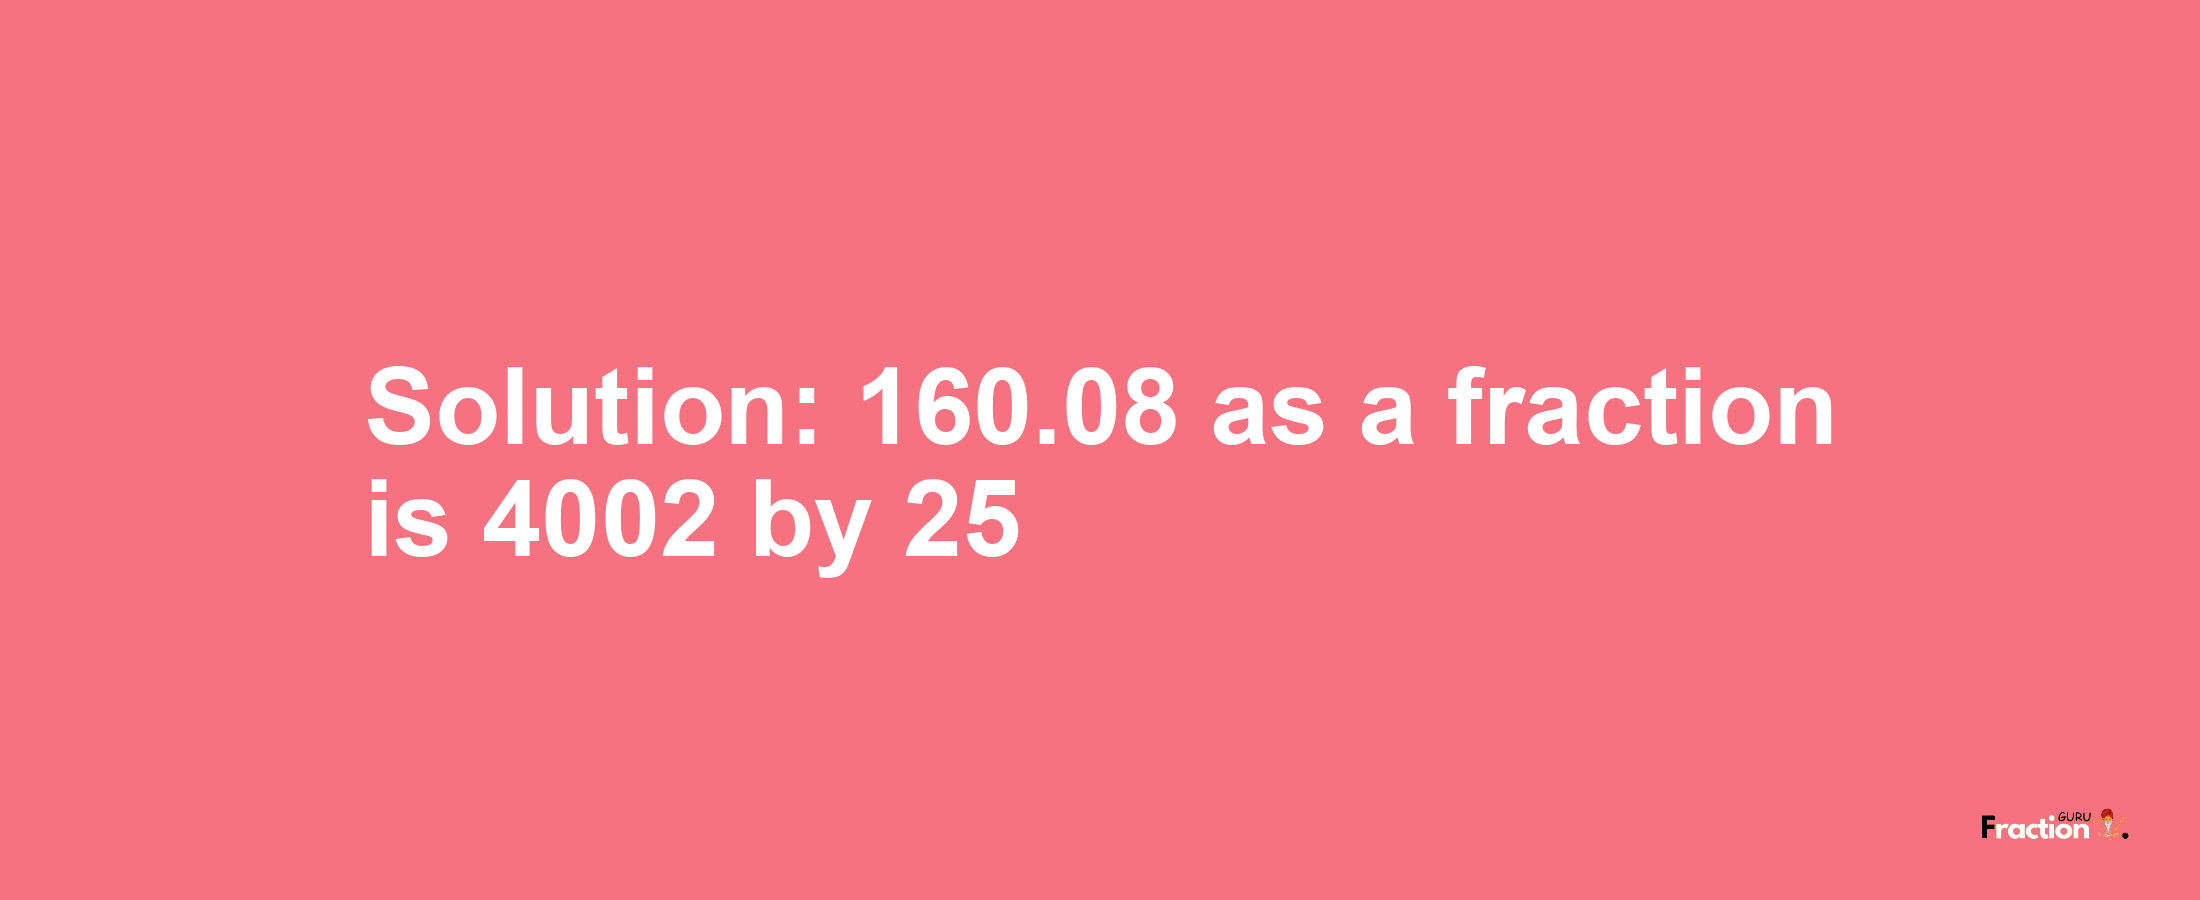 Solution:160.08 as a fraction is 4002/25